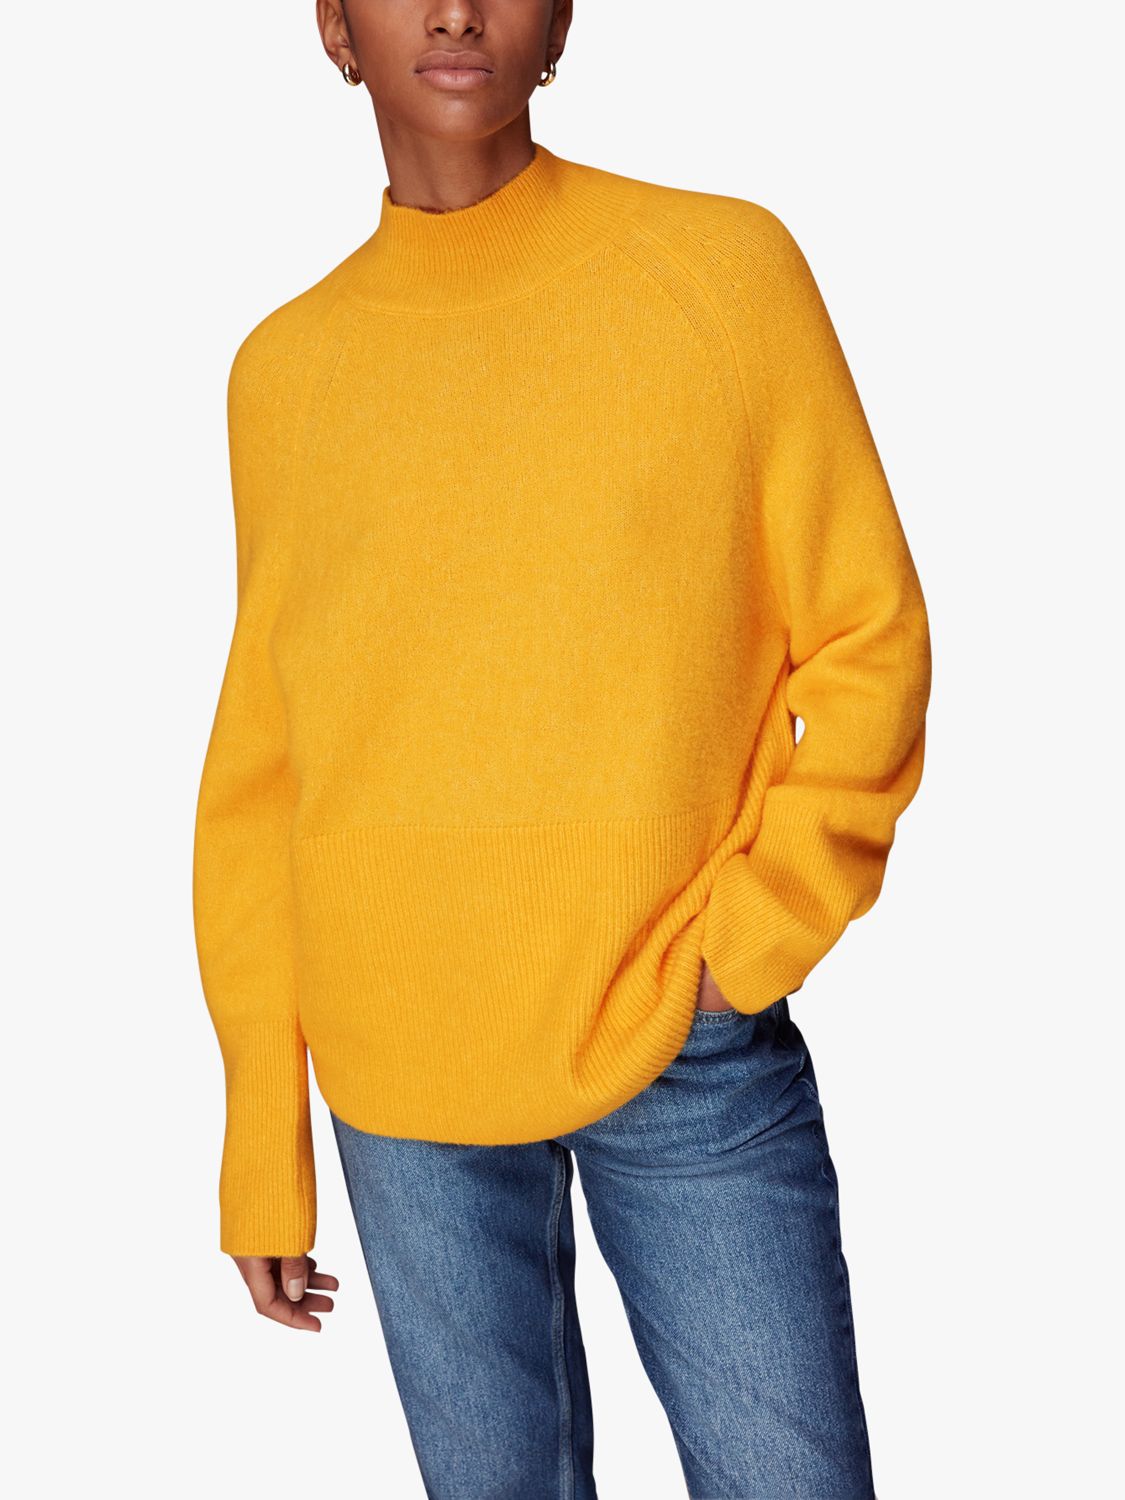 Whistles Oversize Funnel Neck Wool Blend Jumper, Yellow, XS